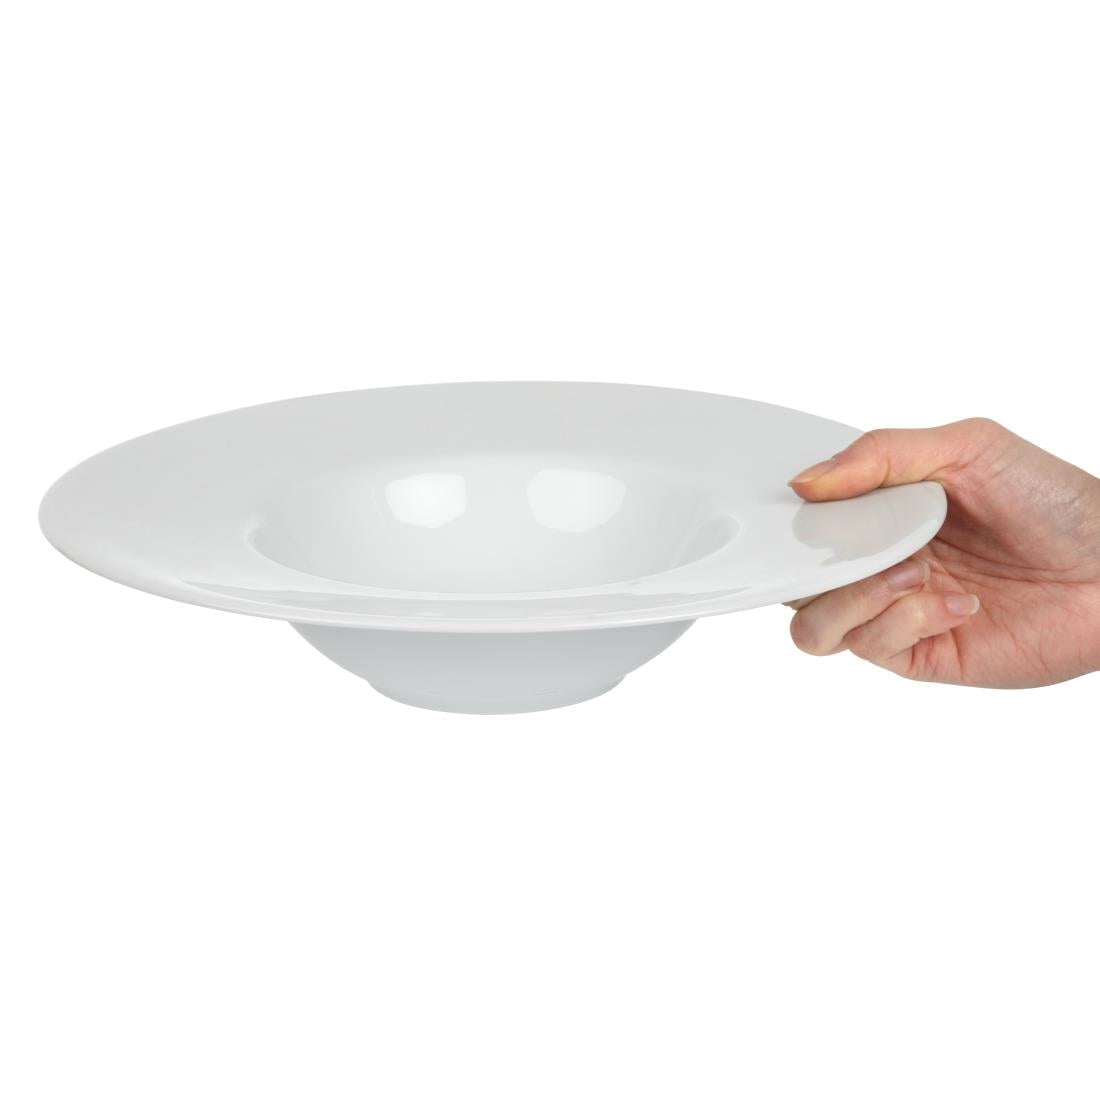 Royal Porcelain Classic White Pasta Plates 280mm (Pack of 6)